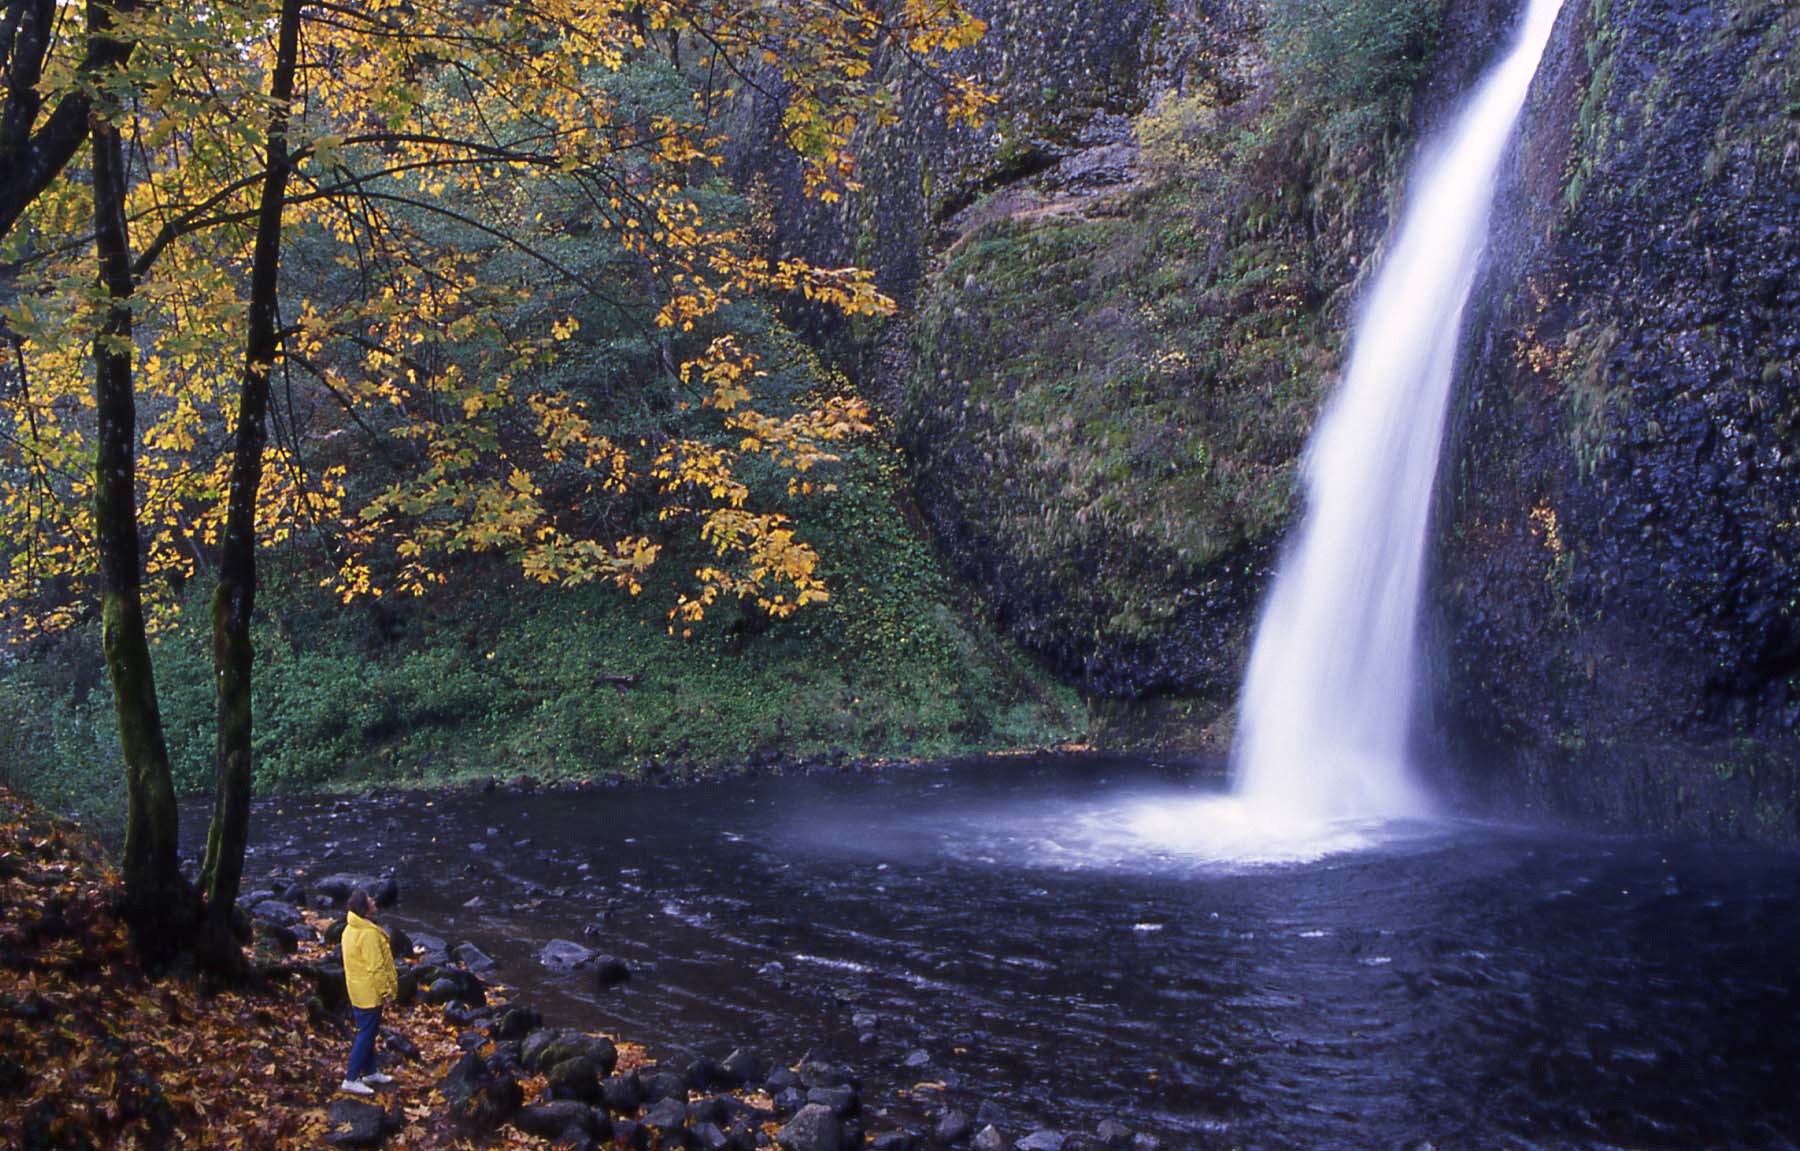 A person in a yellow rain coat stands and observes a waterfall from afar.